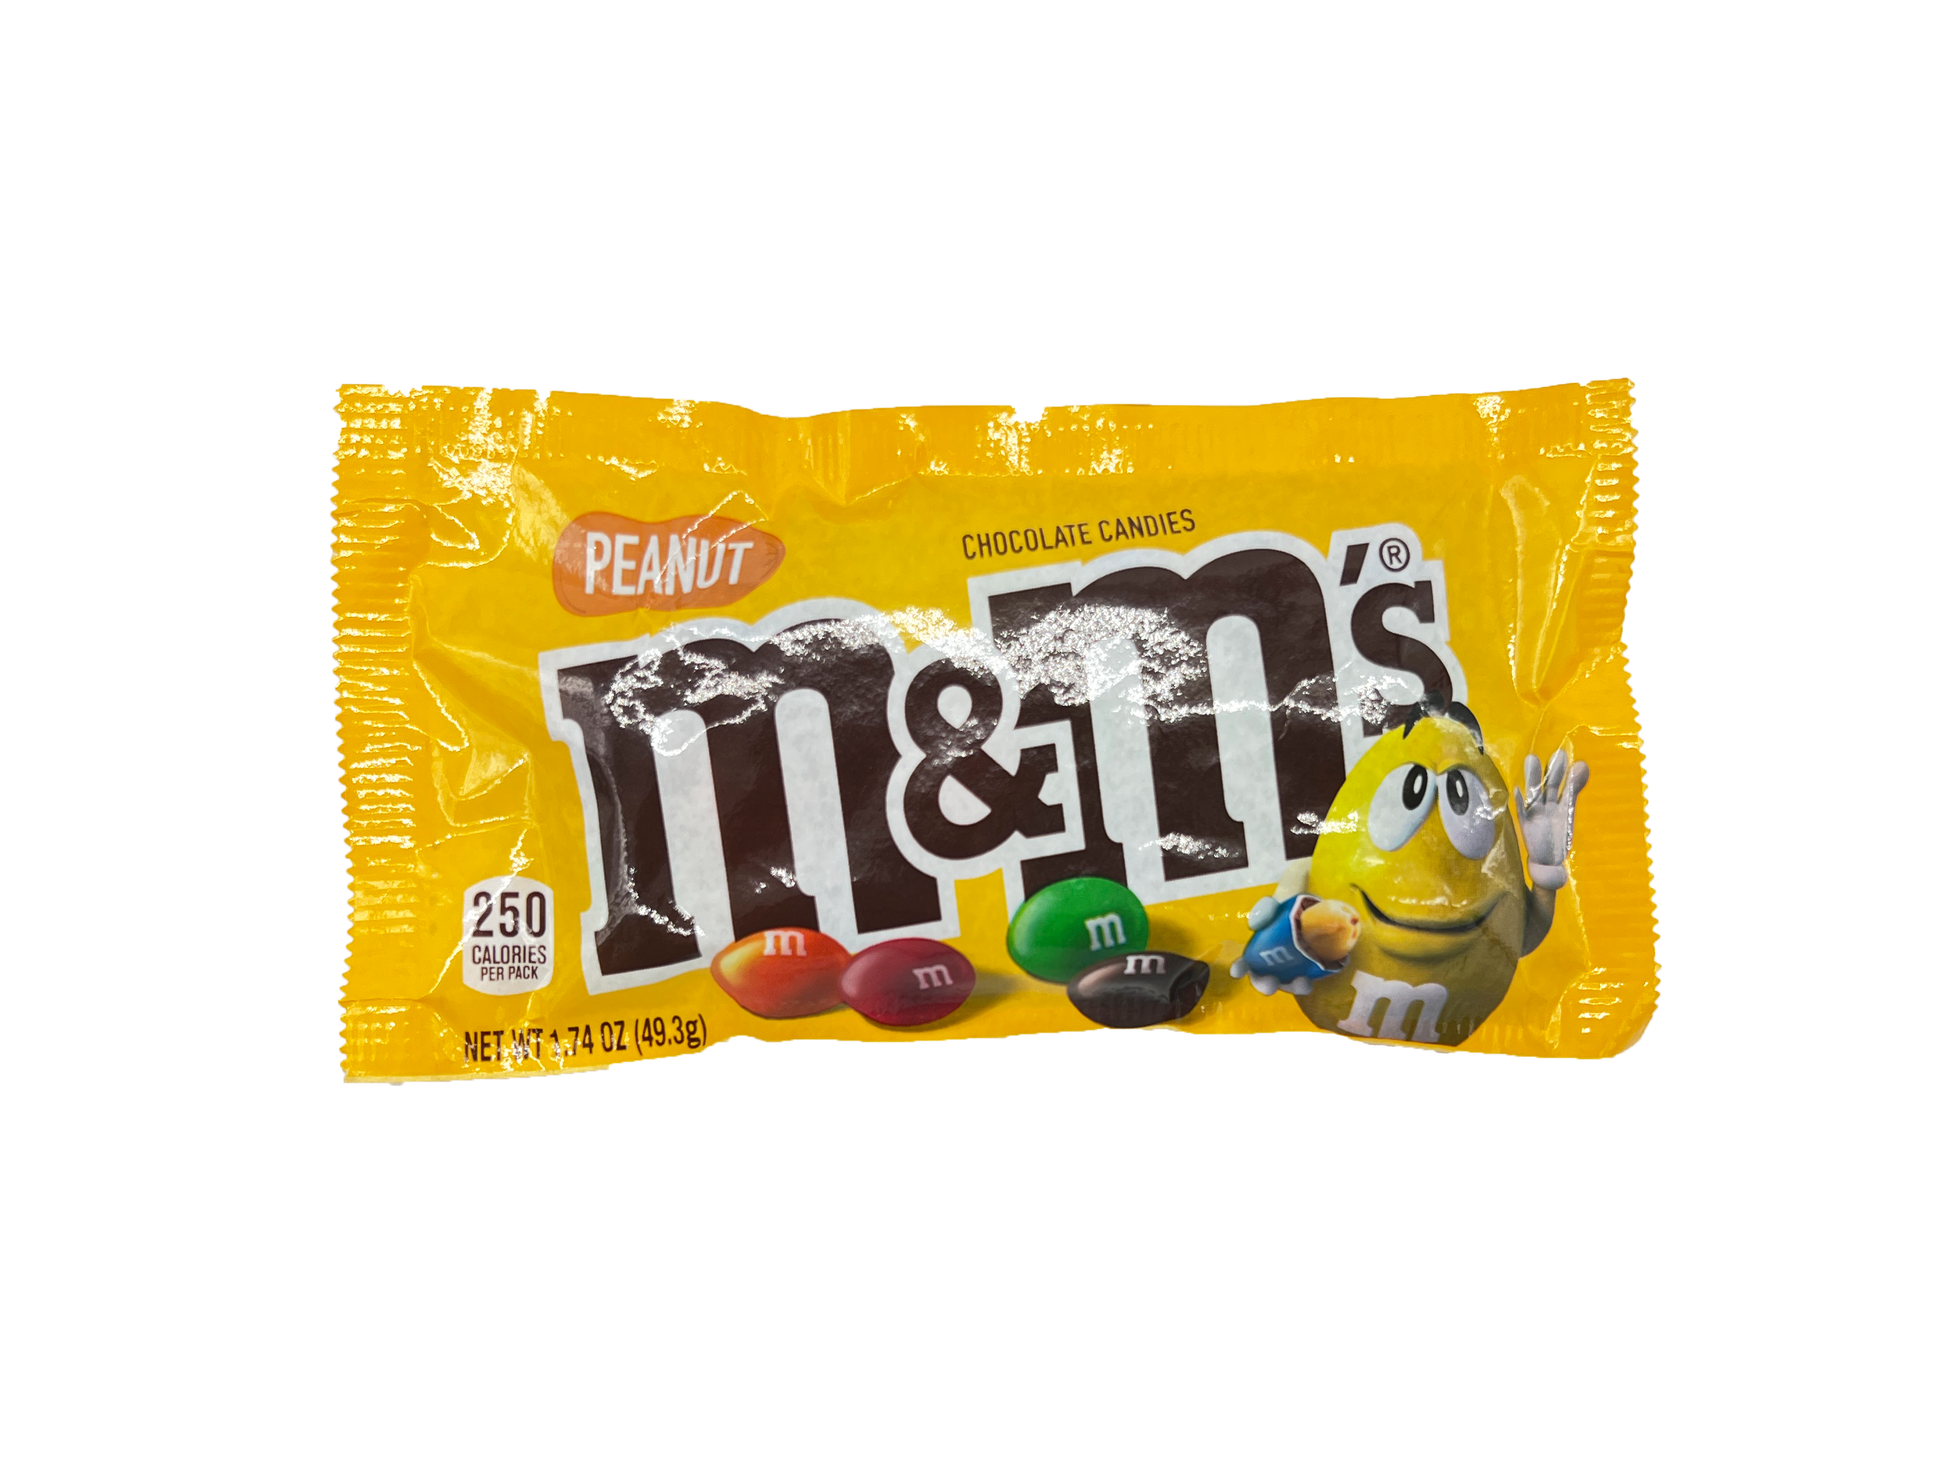  M&M's Chocolate Candies, Peanut, 1.74-Ounce Bags